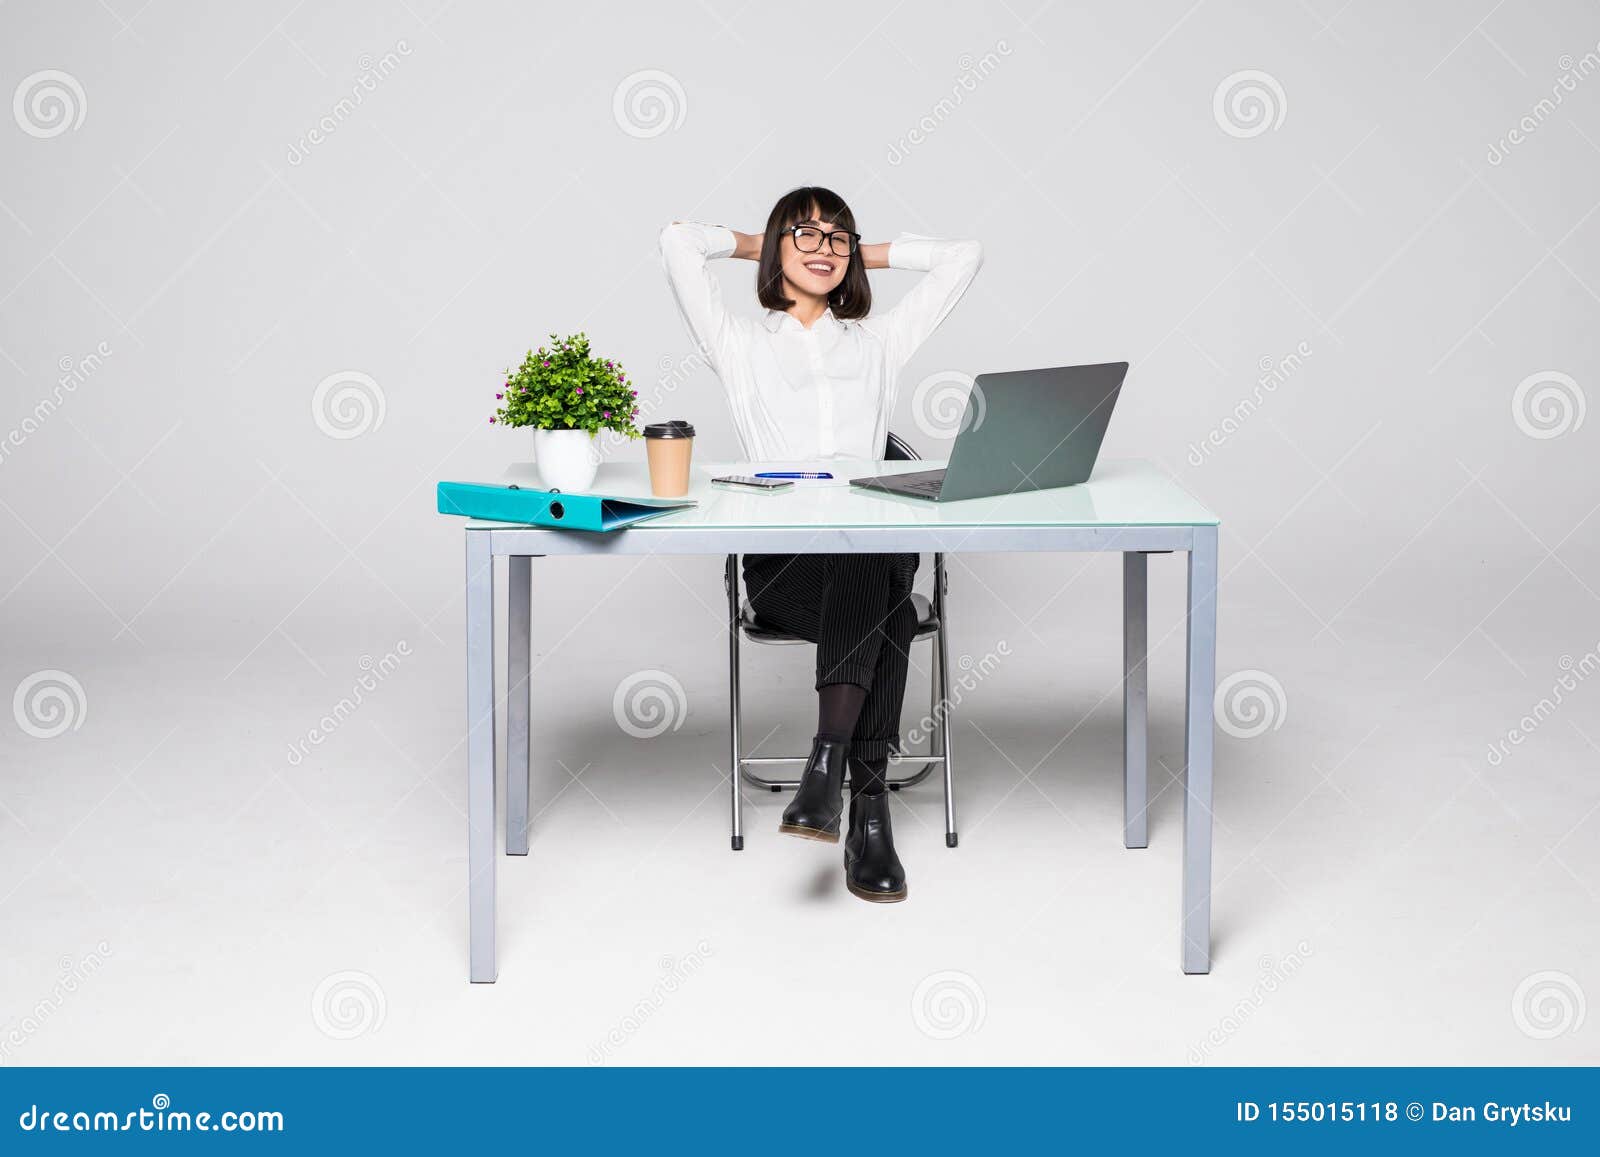 Business Woman Relaxing With Her Hands Behind Her Head And Sitting On